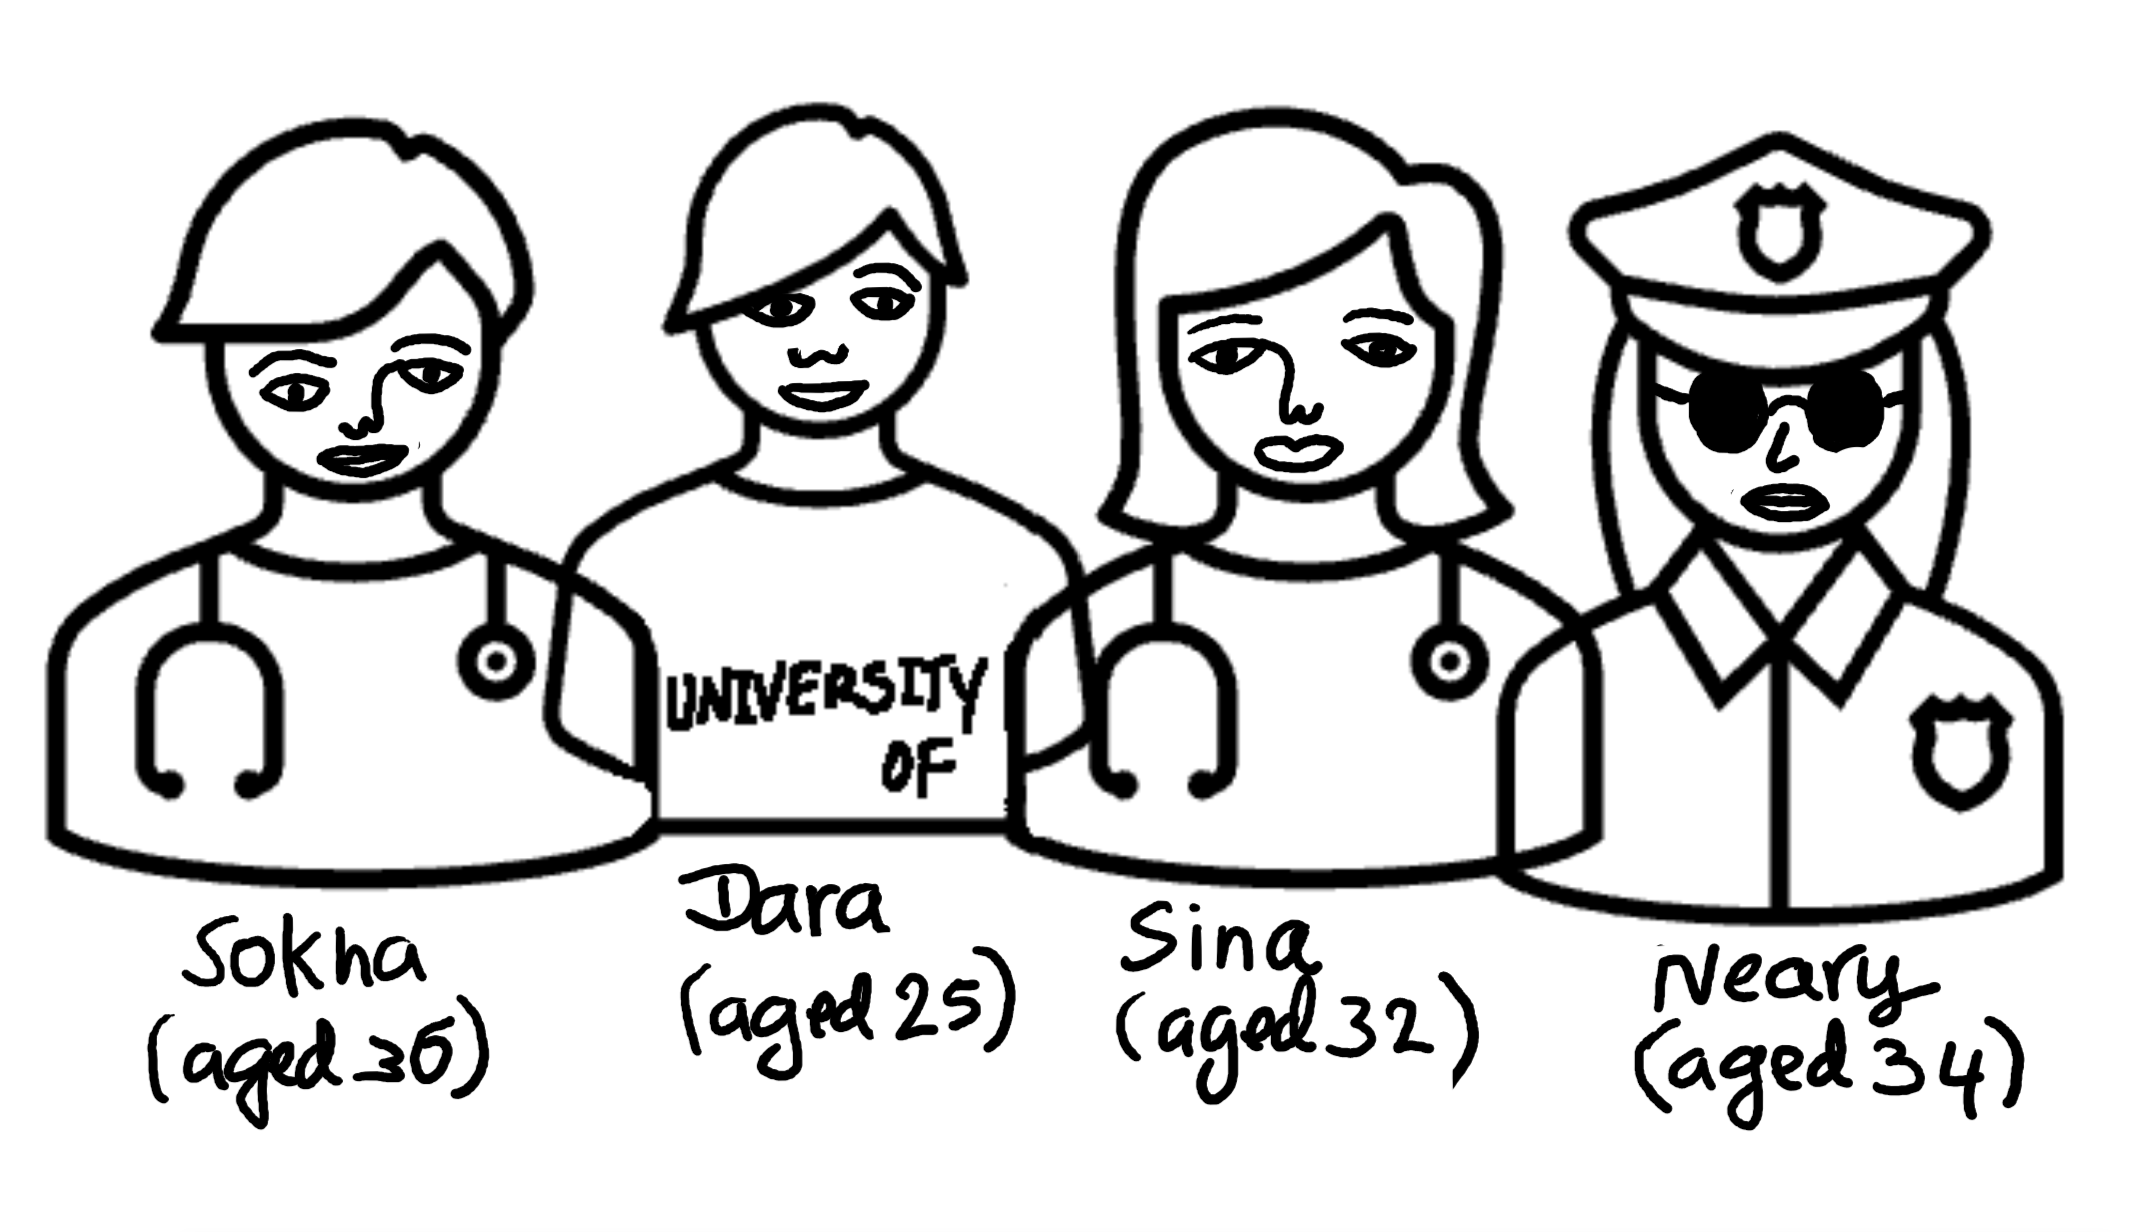 Four people are drawn. Left to right: Sokha (aged 36), has a stethoscope. Dara (aged 25) has a shirt that says "University of." Sina (aged 32) has a stethoscope. Neary (aged 34) is in a police uniform.